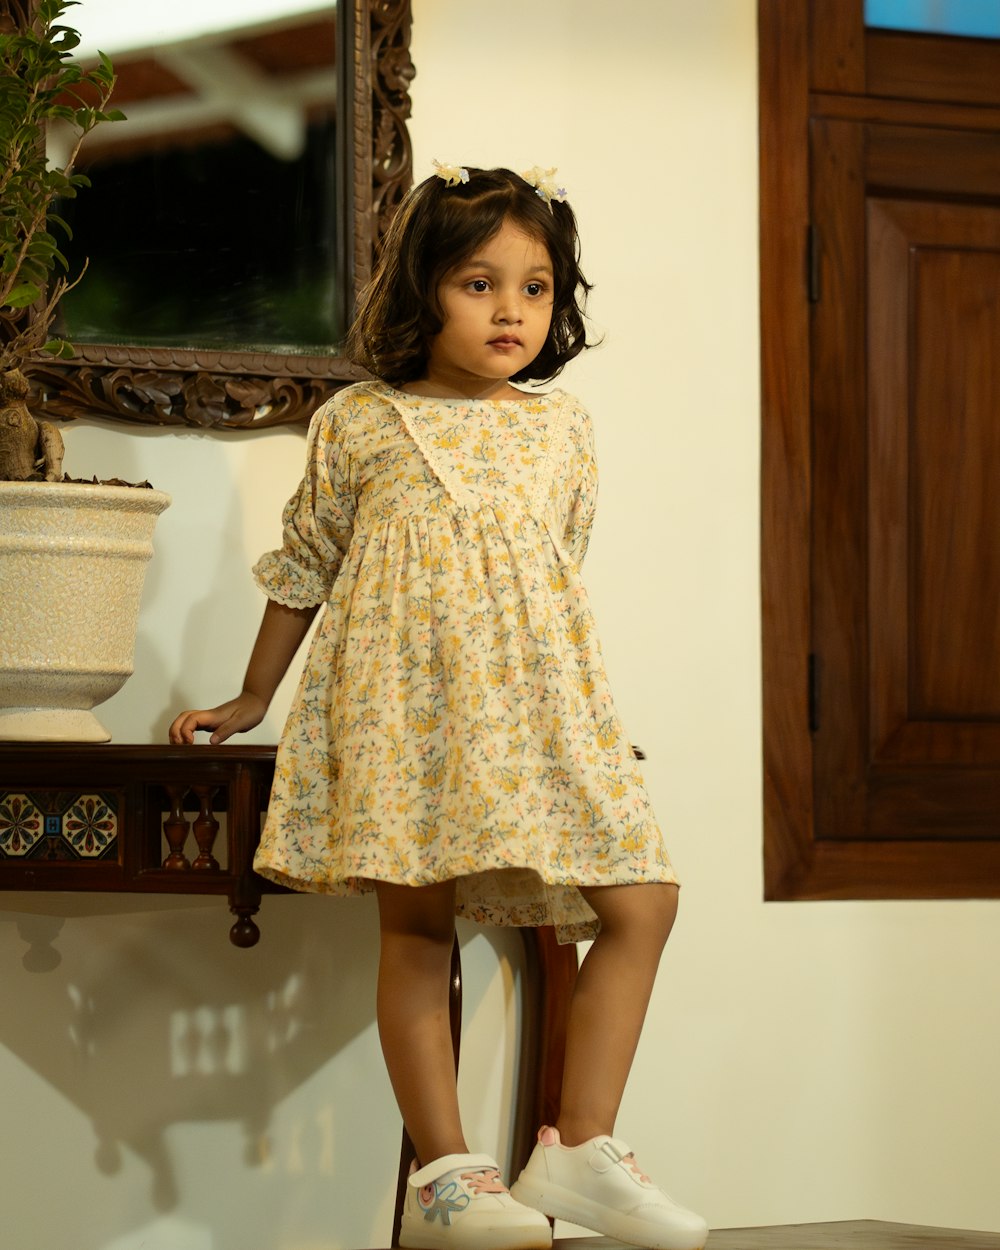 a little girl standing on a chair in front of a mirror